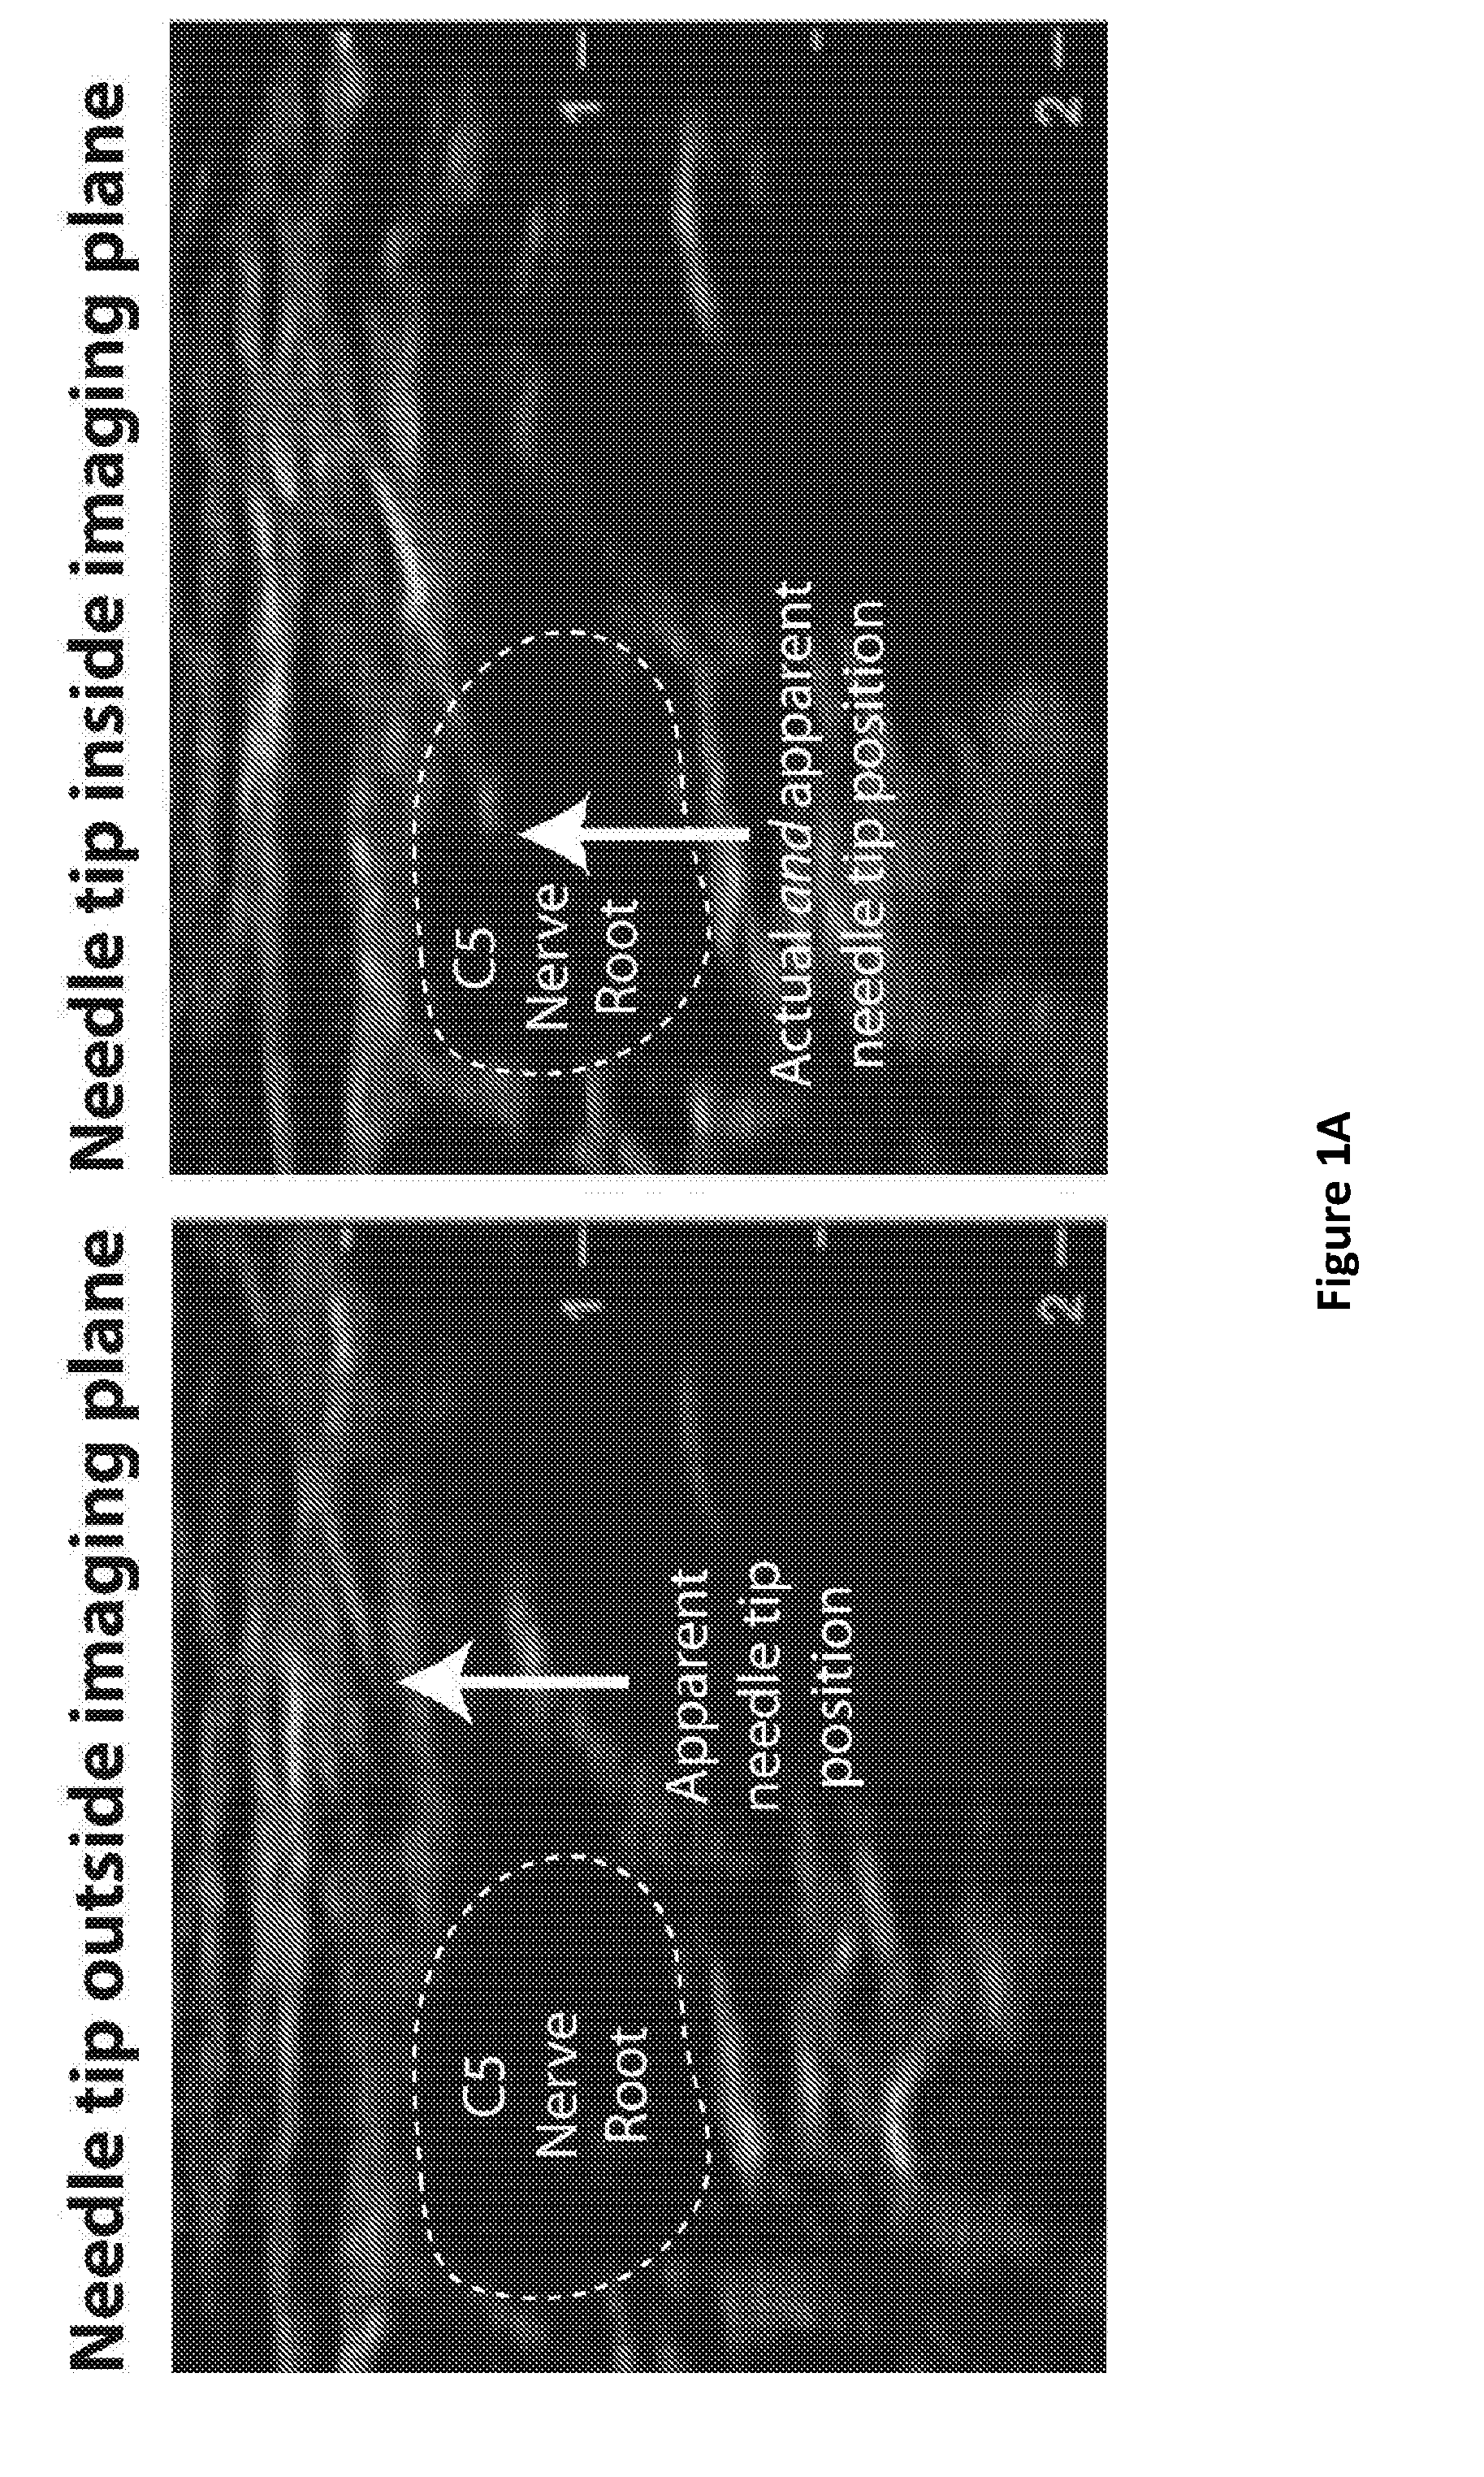 A method and apparatus for determining the location of a medical instrument with respect to ultrasound imaging, and a medical instrument to facilitate such determination